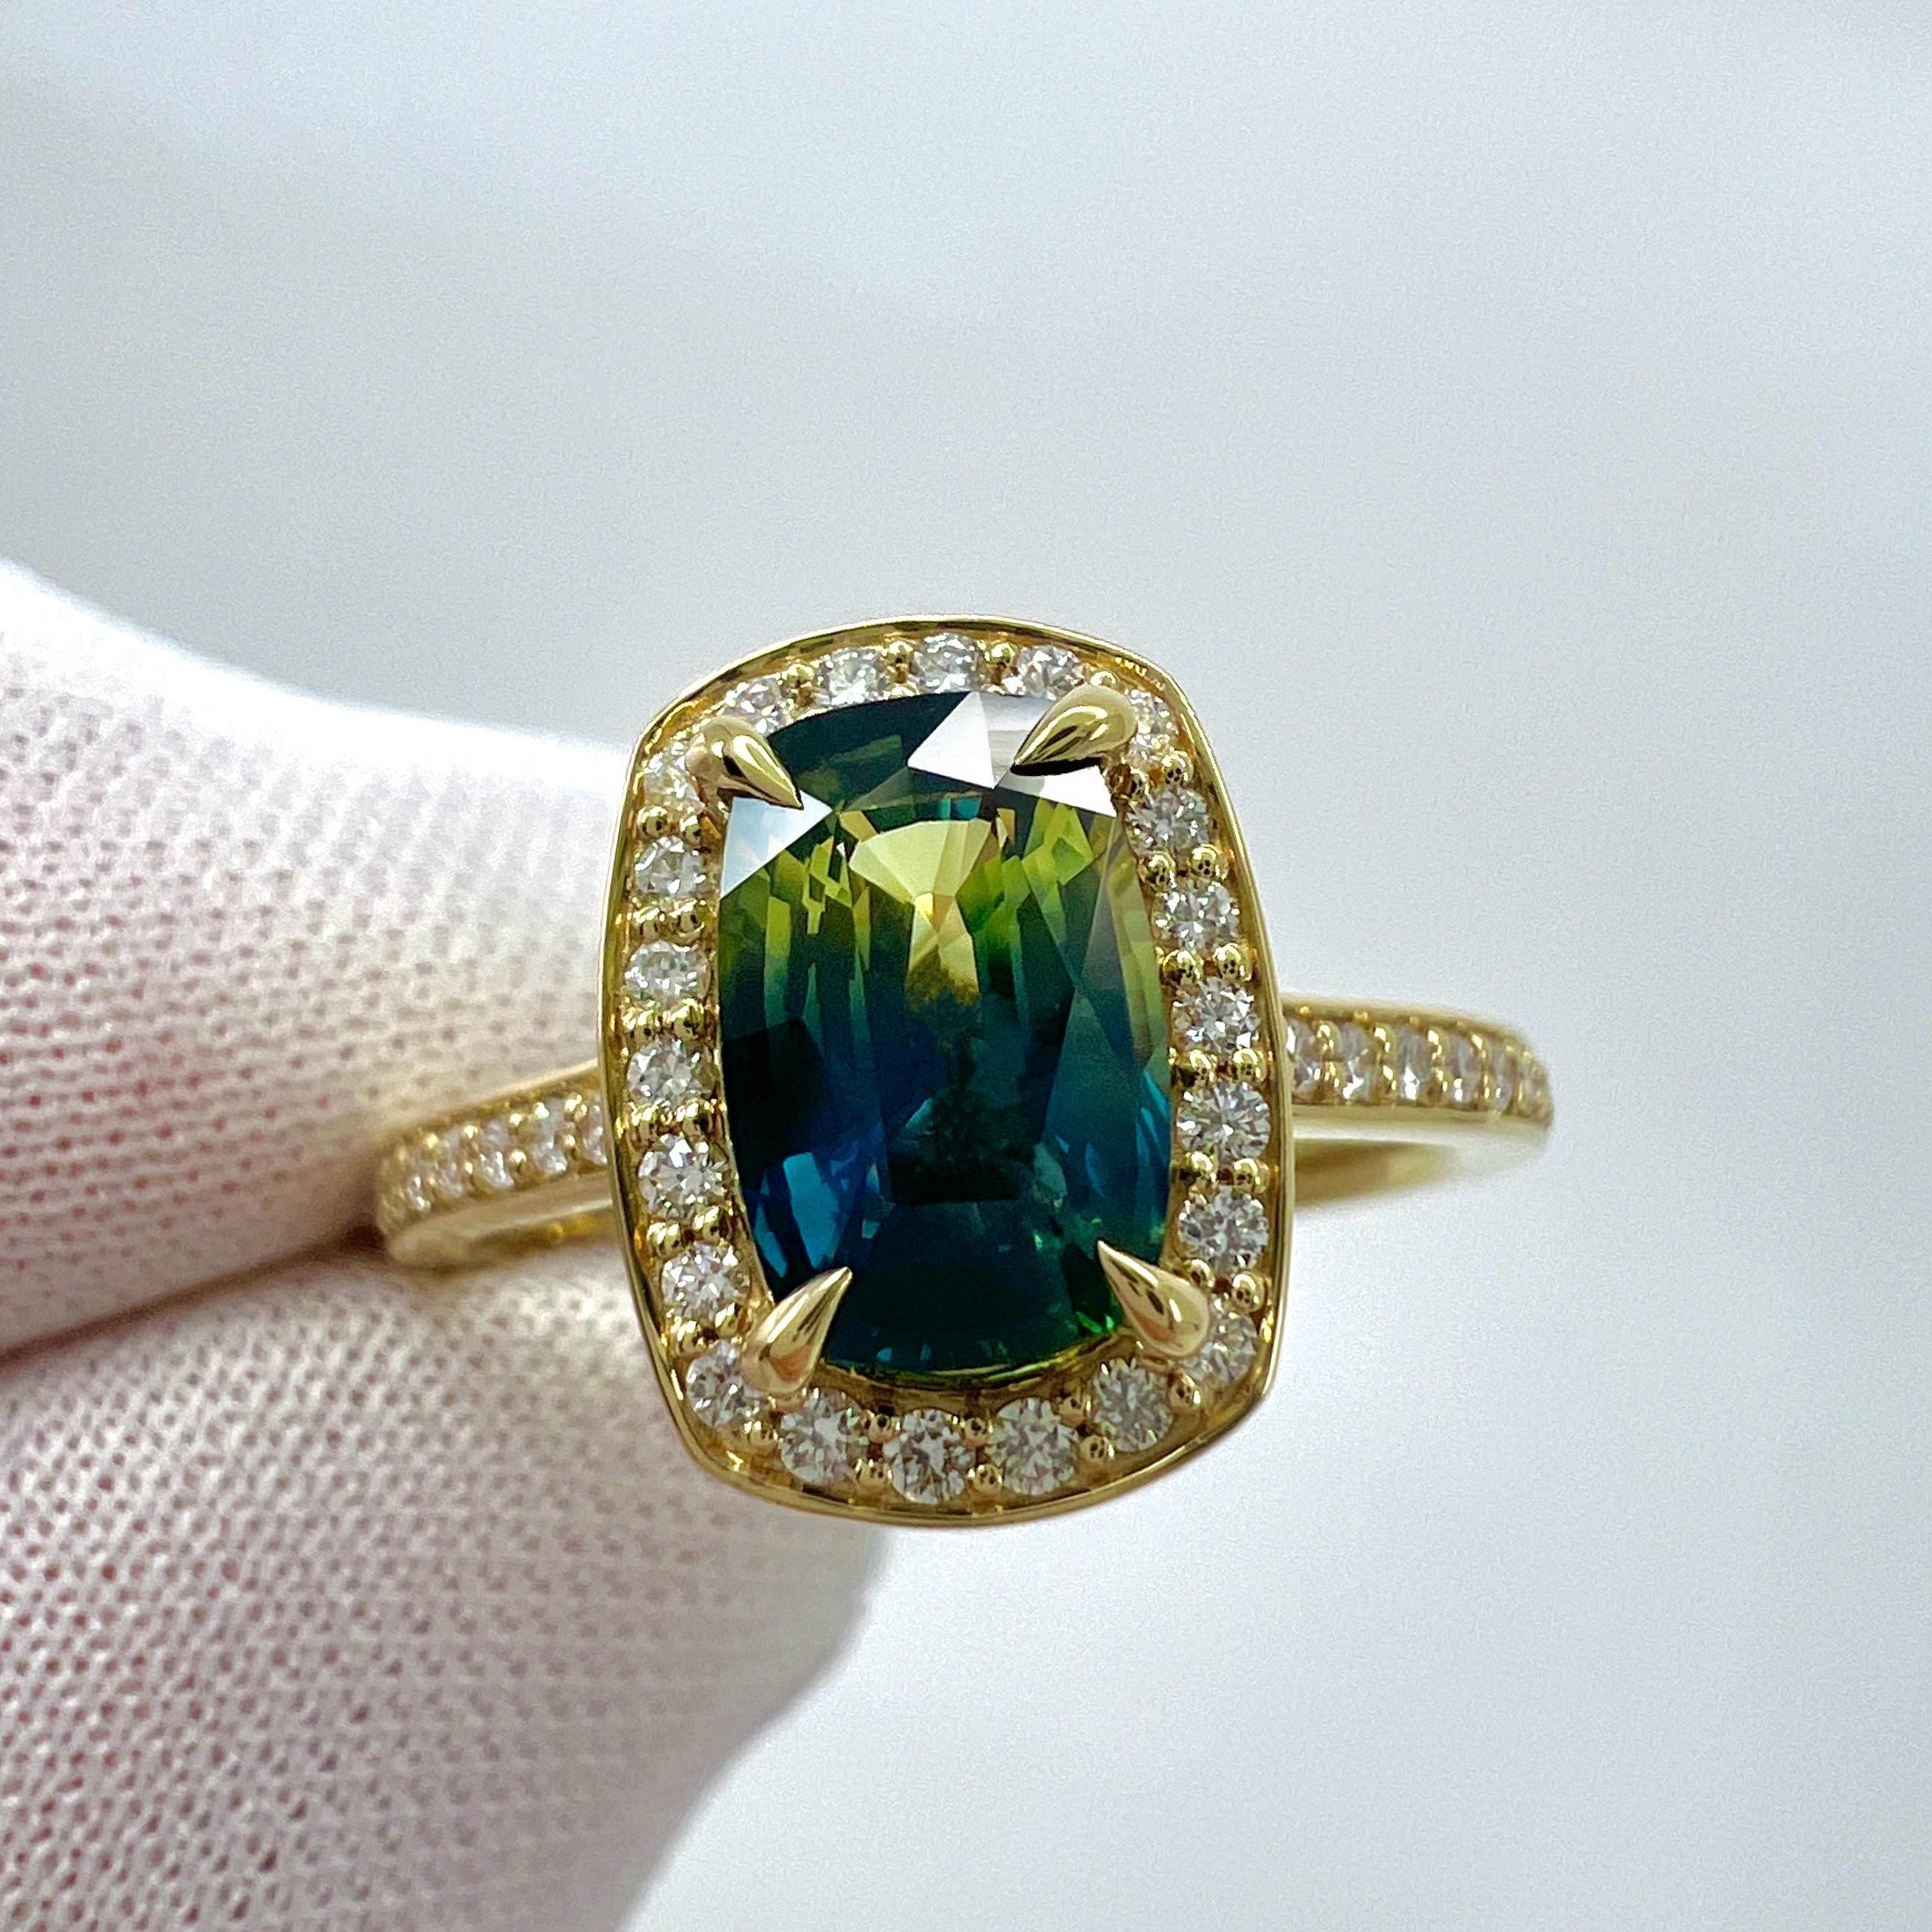 Unique GIA Certified Untreated Bi Colour Sapphire And Diamond 18k Yellow Gold Halo Ring. ITSIT.

Rare GIA Certified 1.46 Carat sapphire with a stunning blue and yellow bi colour - parti colour effect. Very rare and beautiful to see, similarly seen